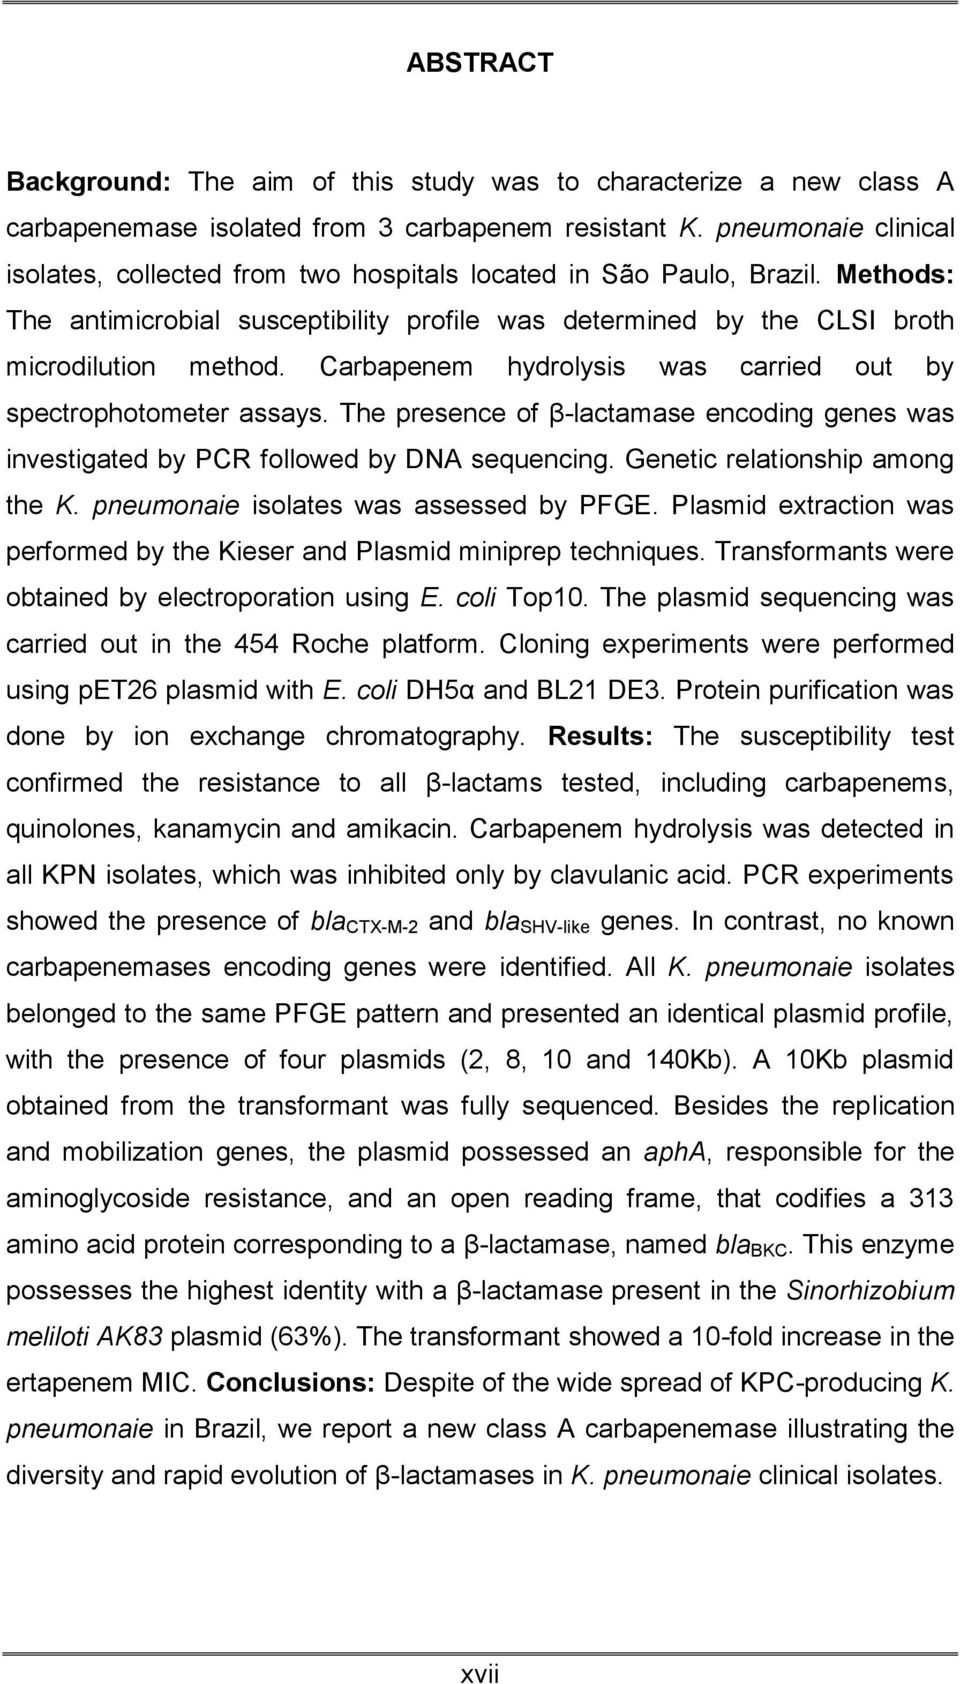 Carbapenem hydrolysis was carried out by spectrophotometer assays. The presence of β-lactamase encoding genes was investigated by PCR followed by DNA sequencing. Genetic relationship among the K.